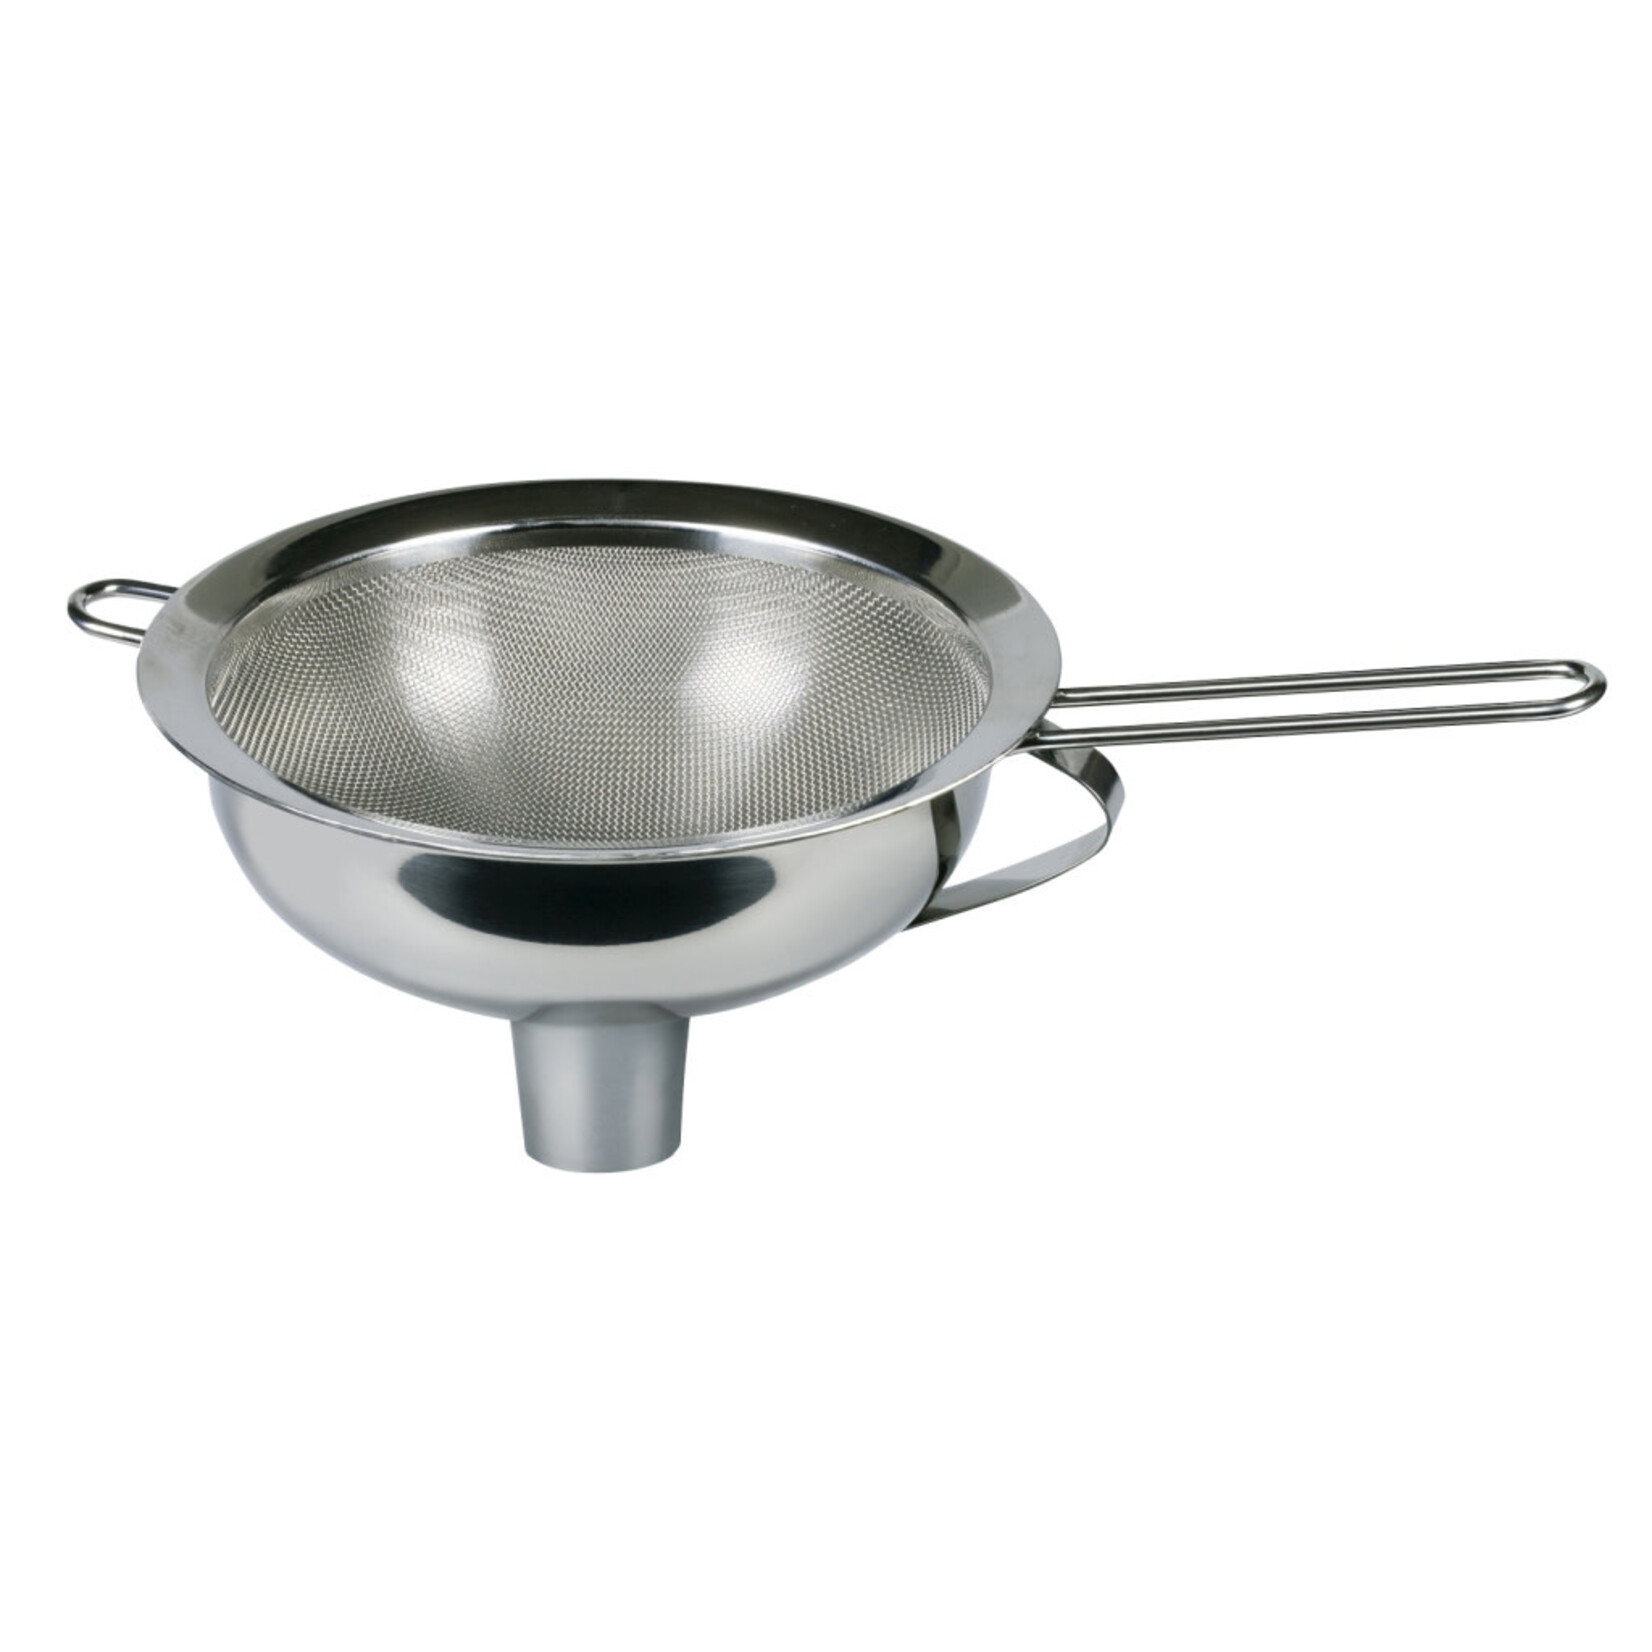 iSi Culinary Whip rvs iSi trechter en zeef iSi rvs funnel & Sieve iSi 2724